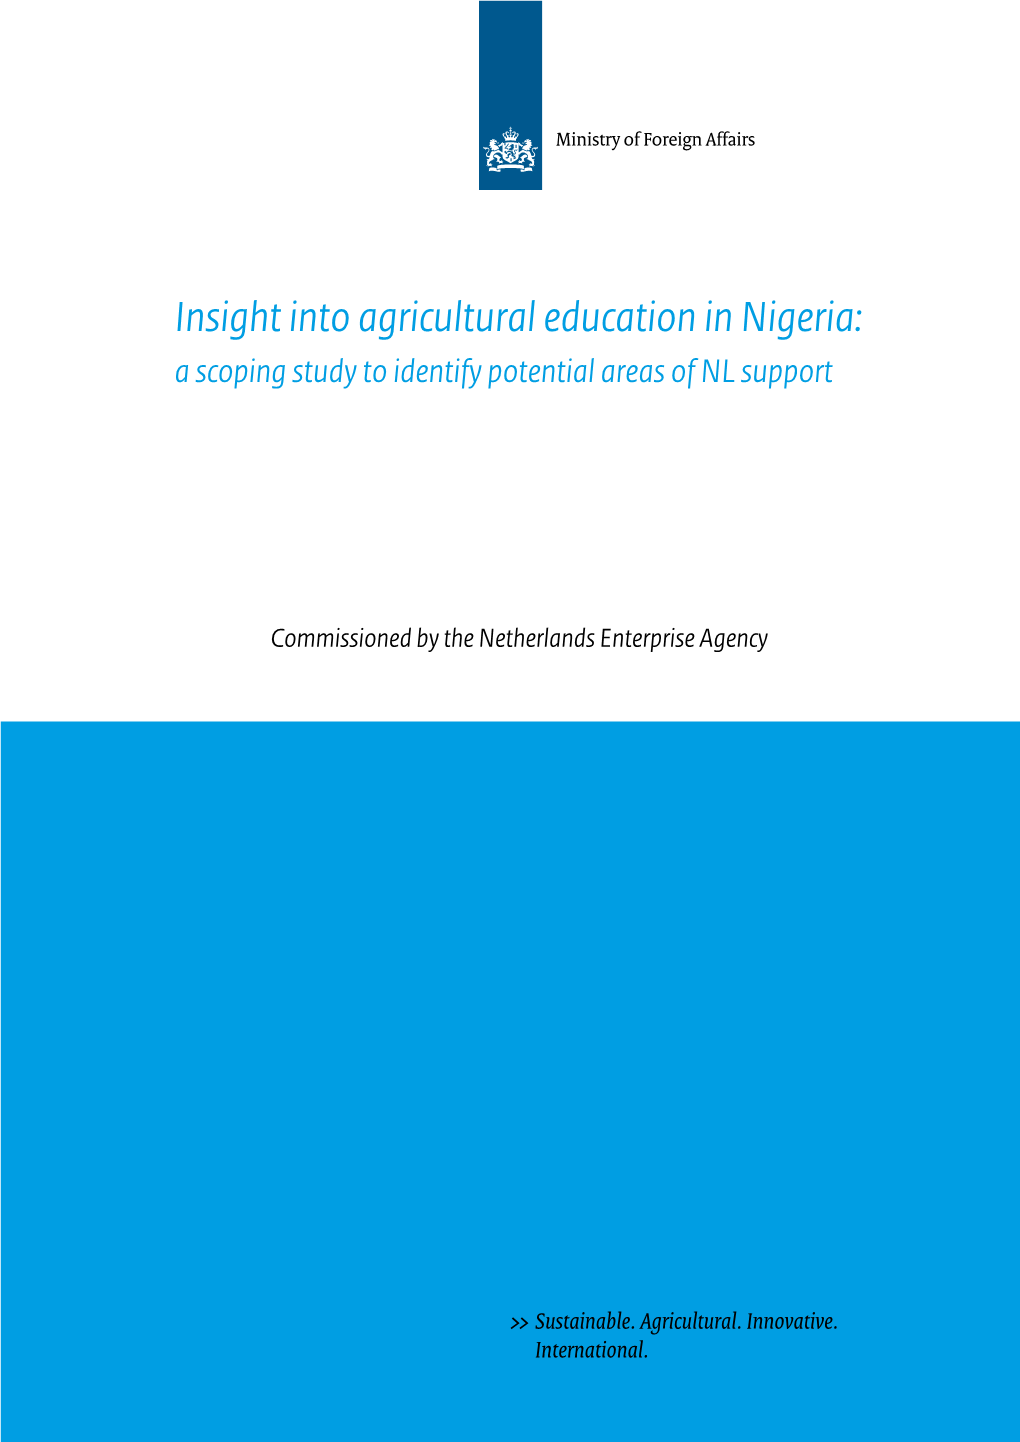 Insight Into Agricultural Education in Nigeria: a Scoping Study to Identify Potential Areas of NL Support